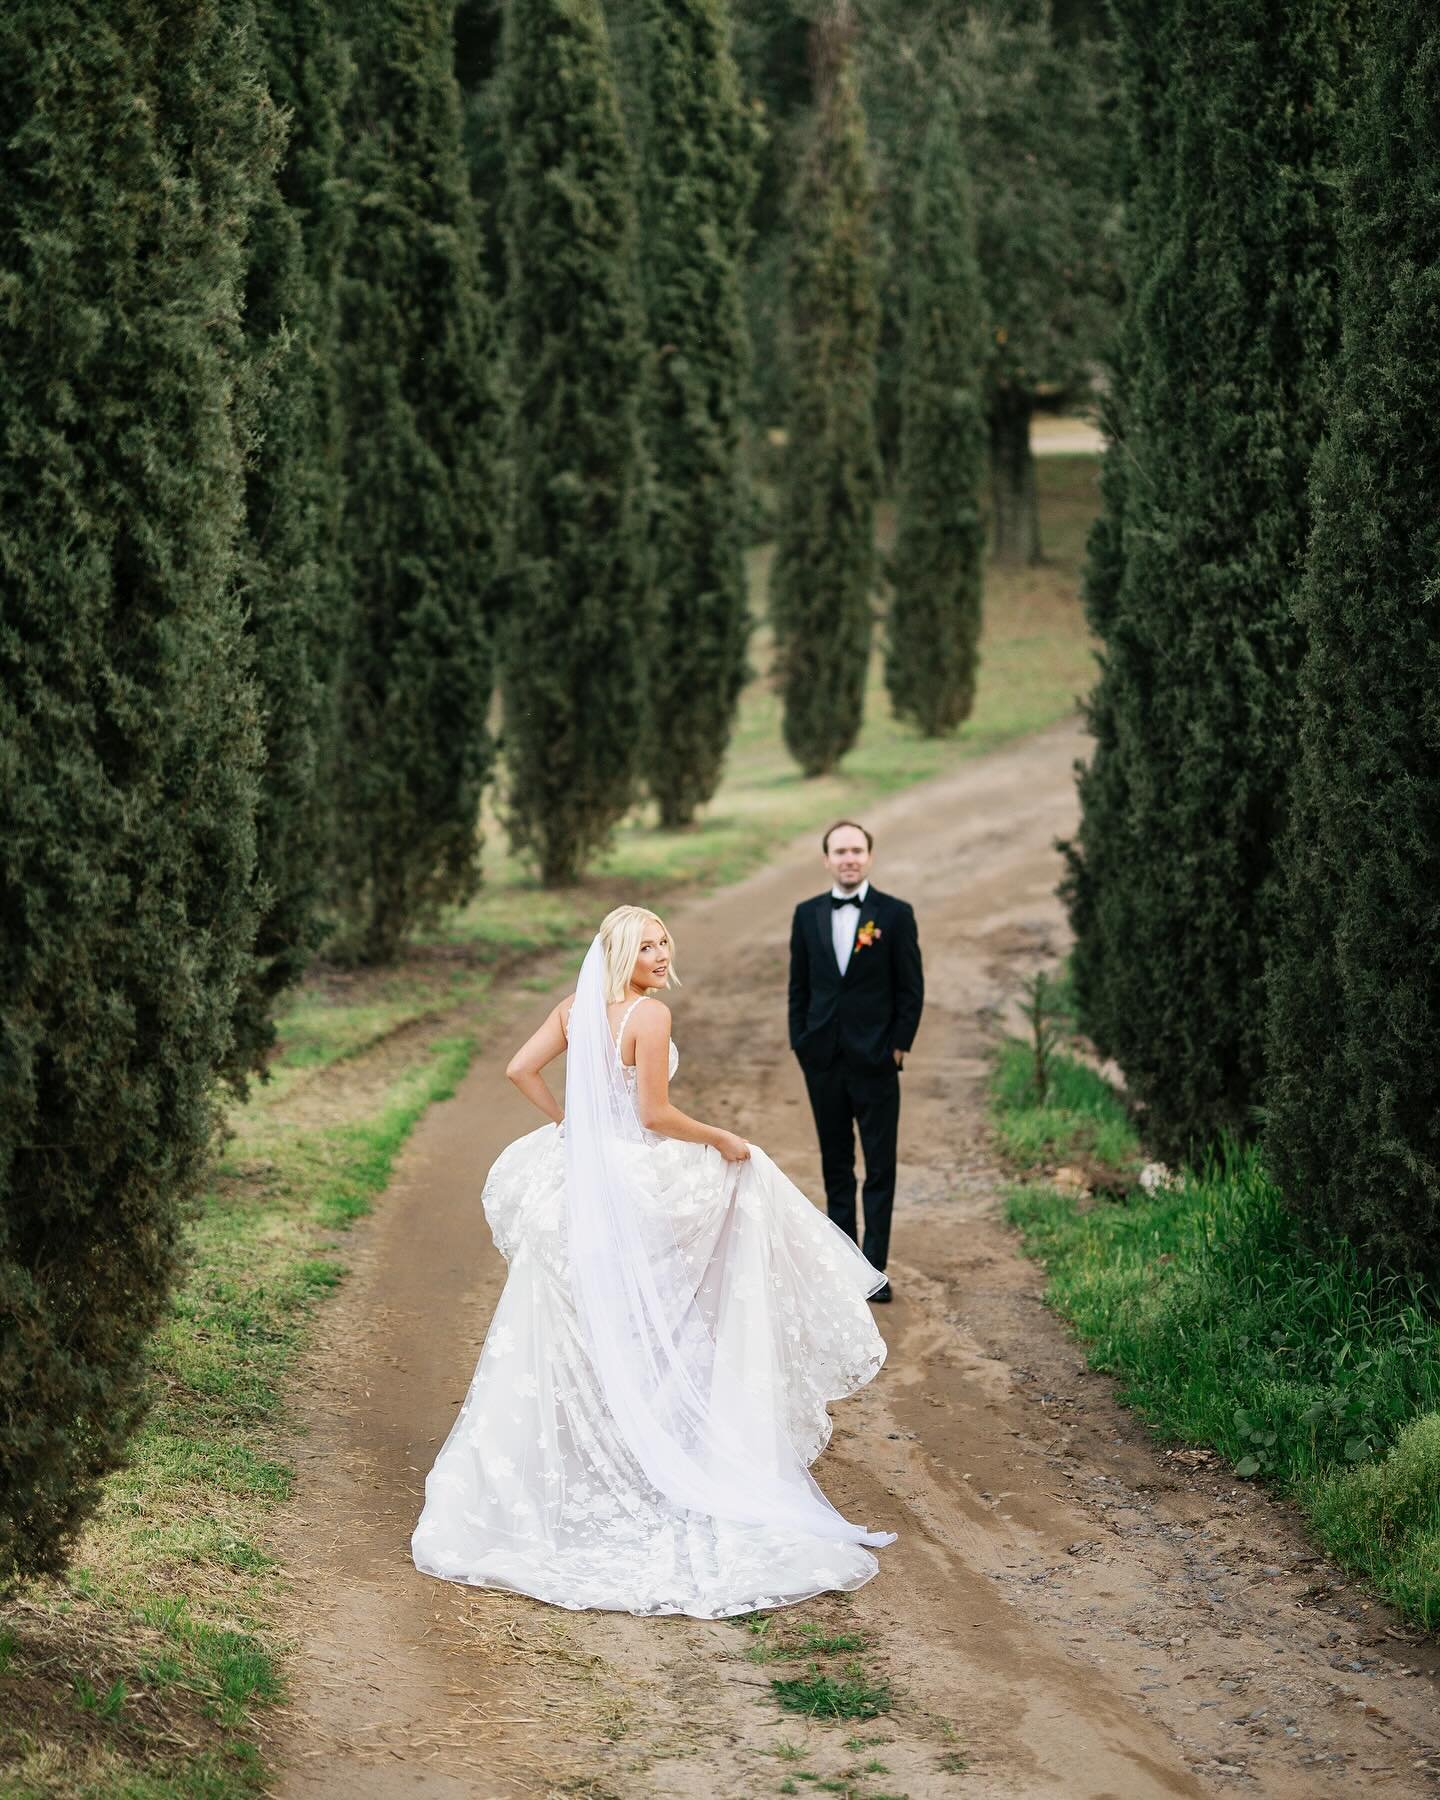 This venue, inspired by the allure of Tuscany, emanates an enduring beauty that makes it an exquisite choice for weddings. 🌿

D R E A M  T E A M 
Venue | @milagrowinery
Planning + Design | @koralko_
Photography | @mariadavisphoto @yes.dmitrii
Videog